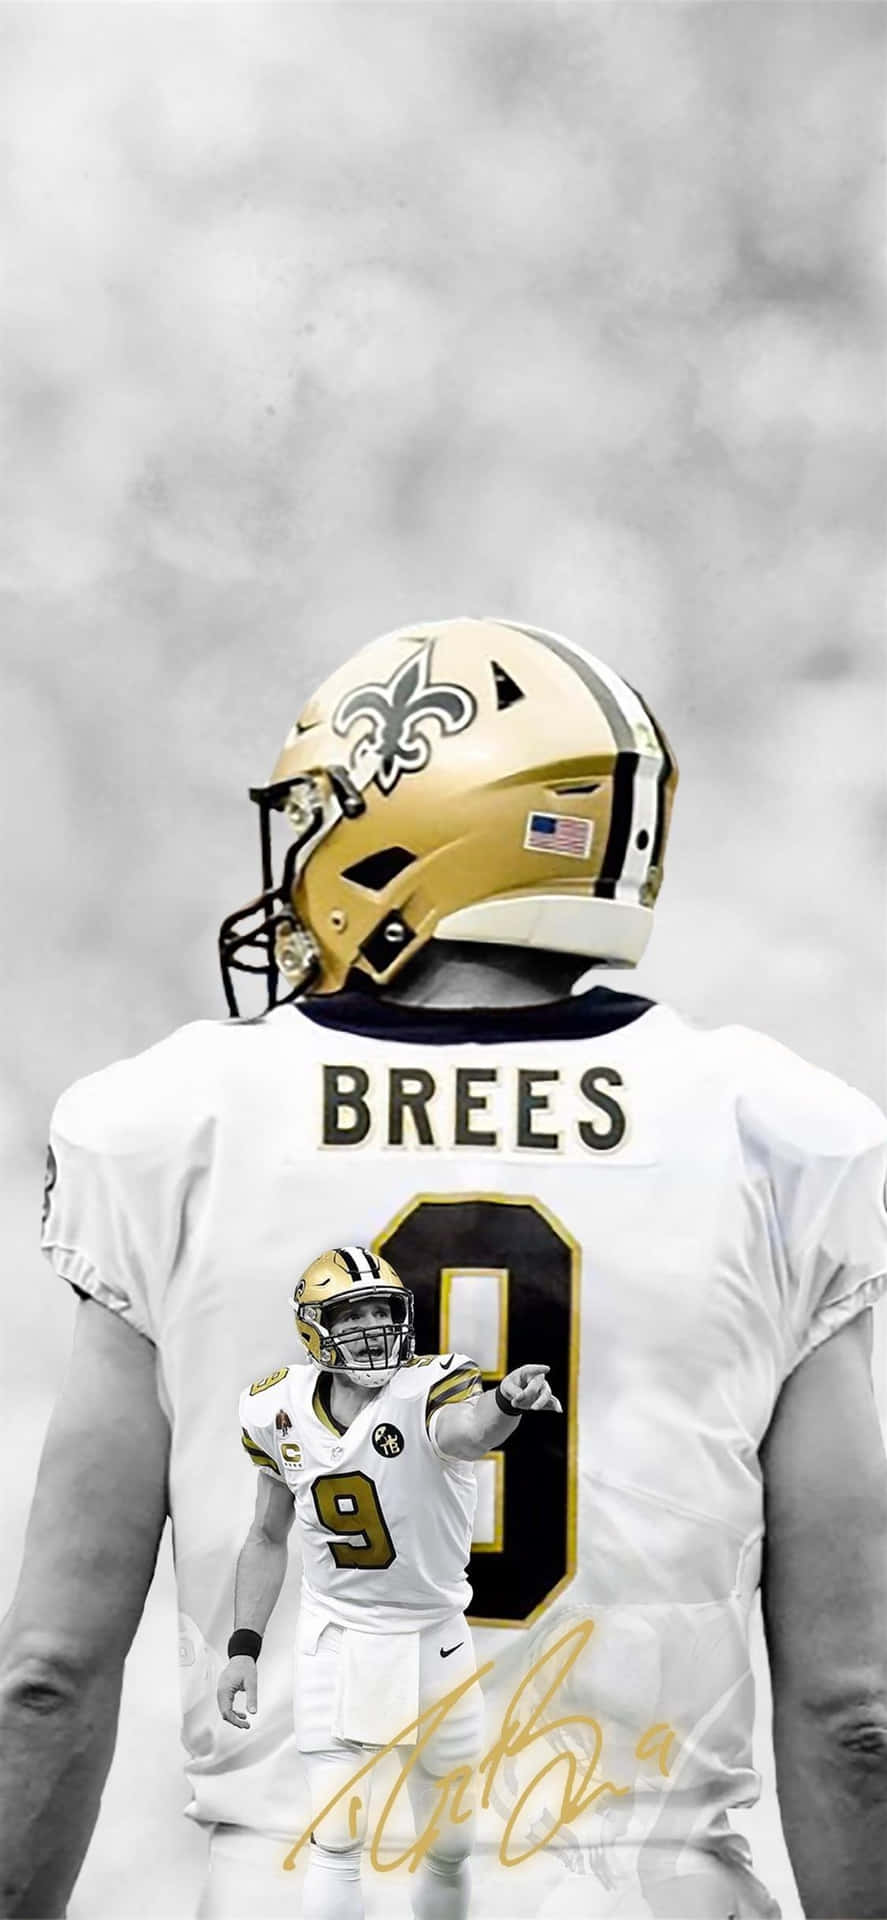 NEW ORLEANS WILL Support Our Saints!